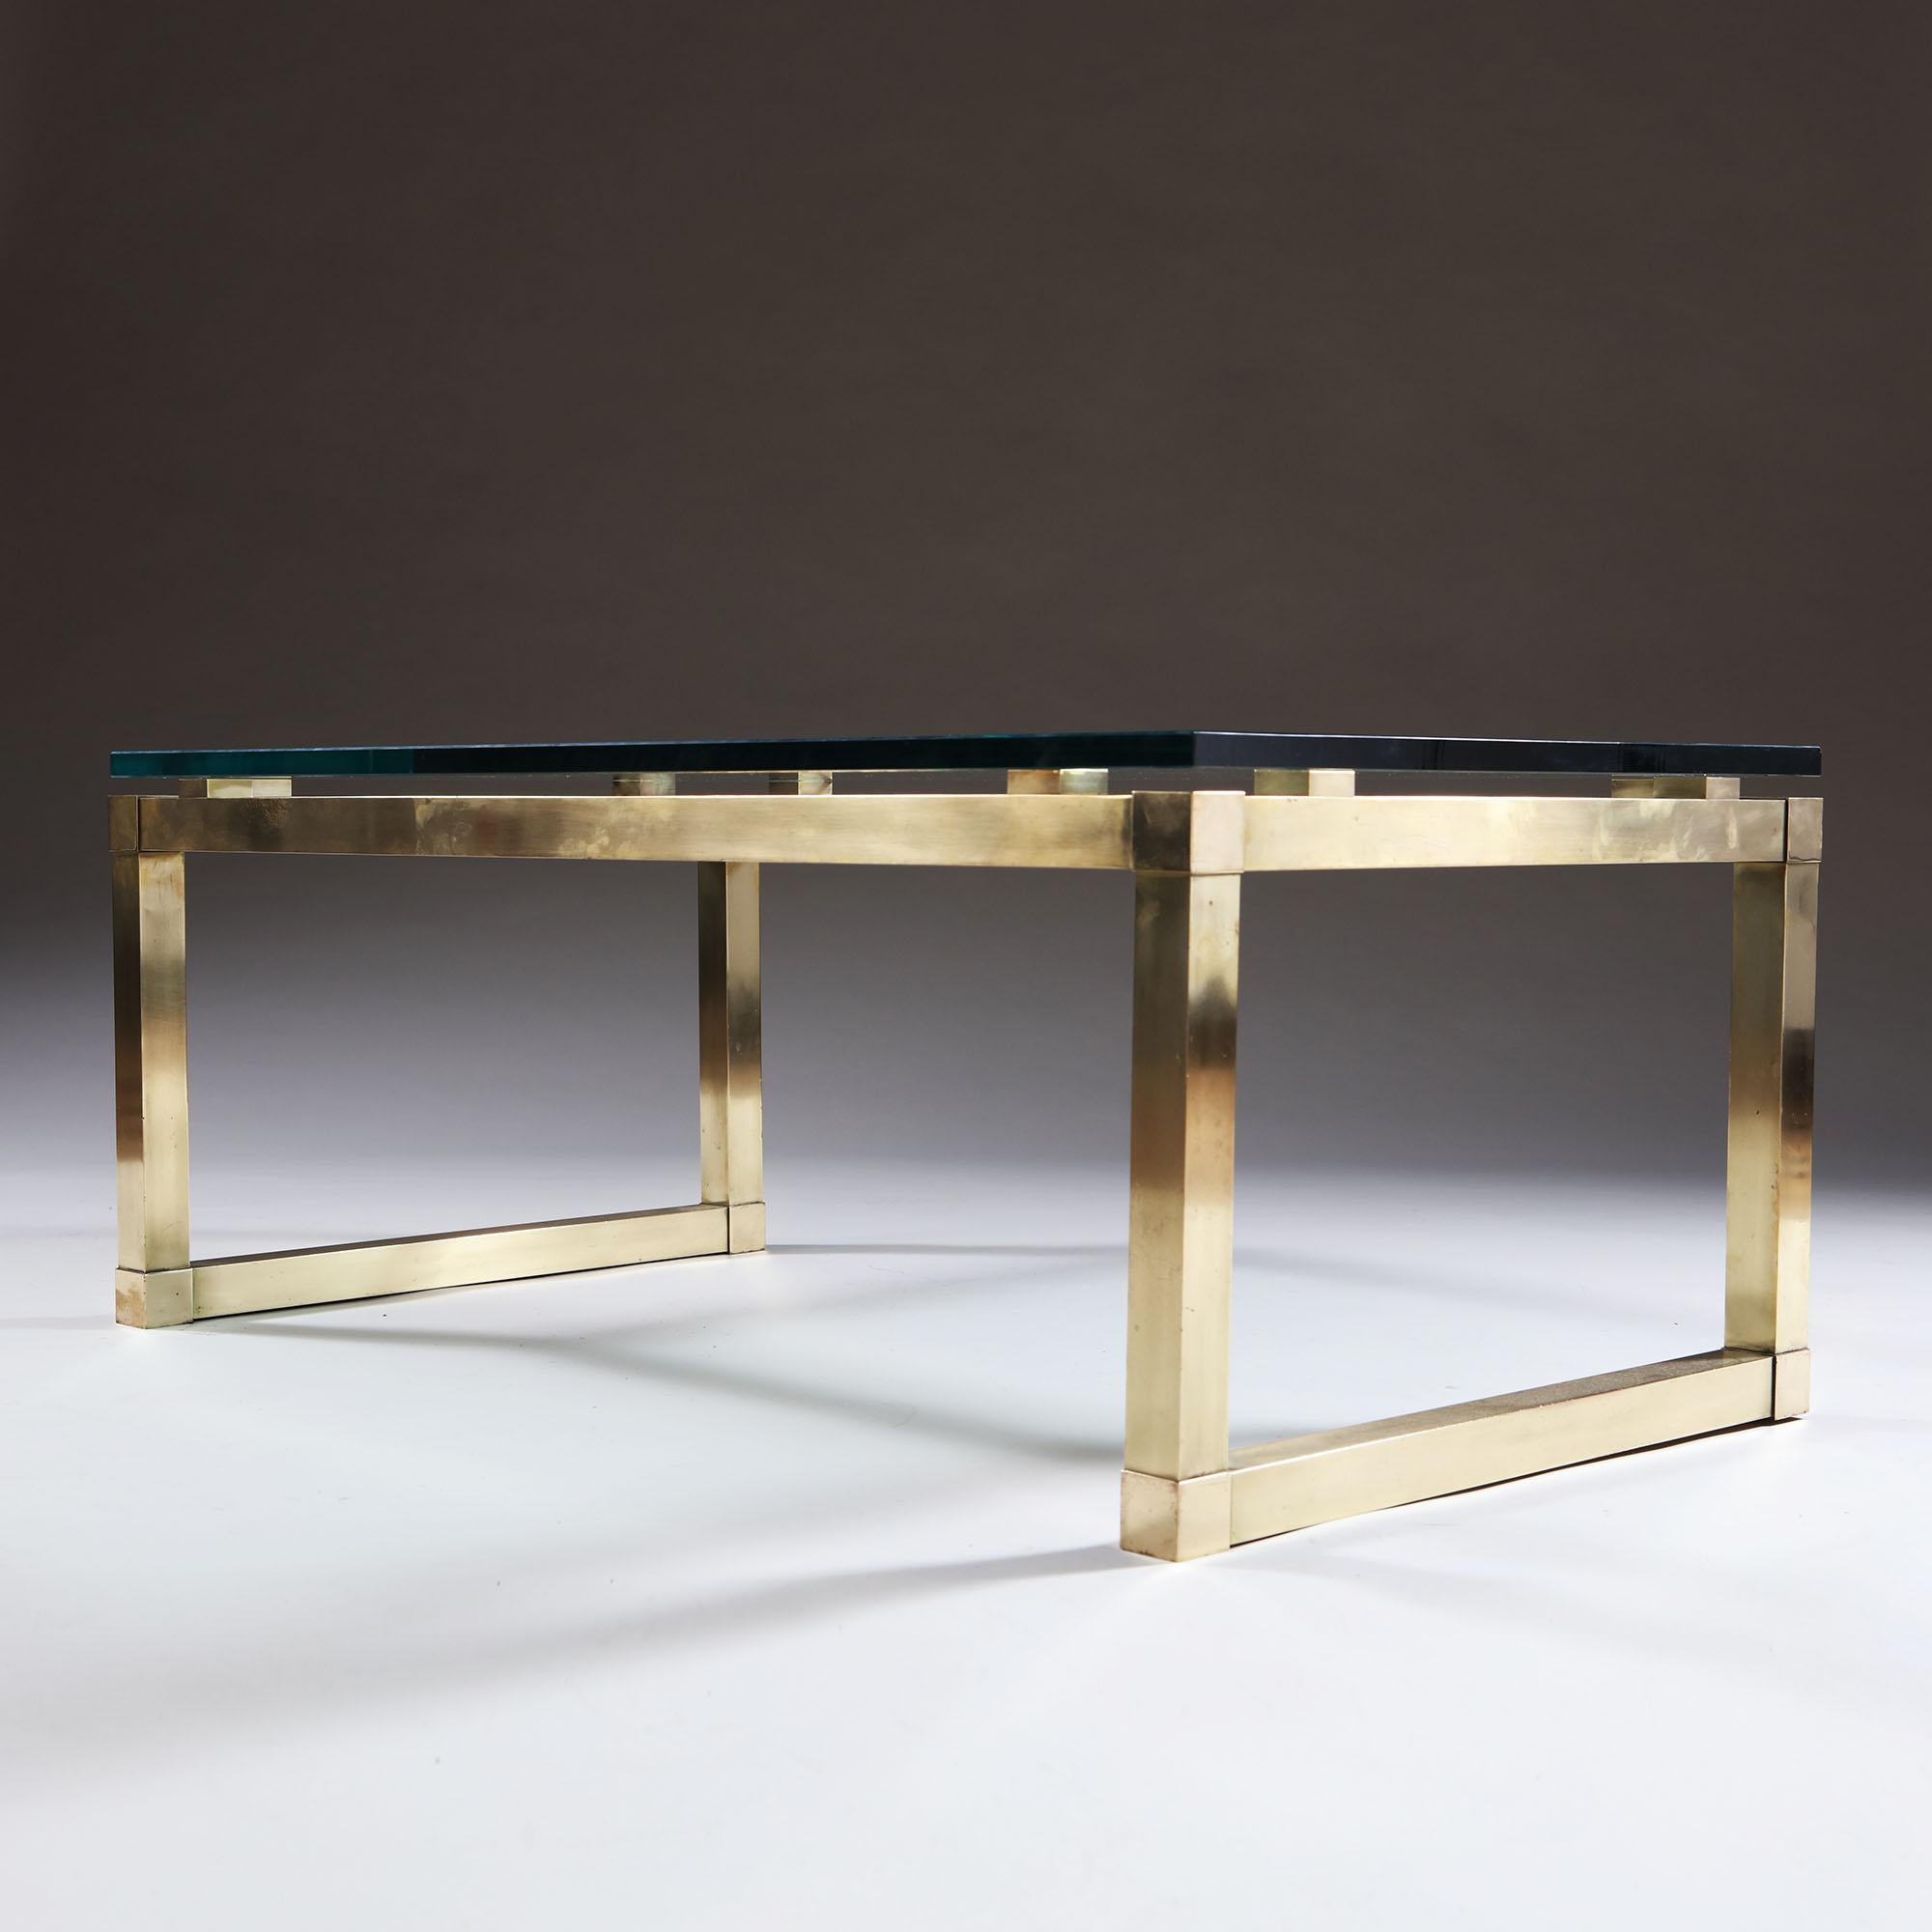 A fine rectangular brass coffee table of angular design, with square brass cushion supports retaining the original glass top. The underside of the rails engraved with a patent and dated 1971. 

A similar table designed and supplied to Chester Roth